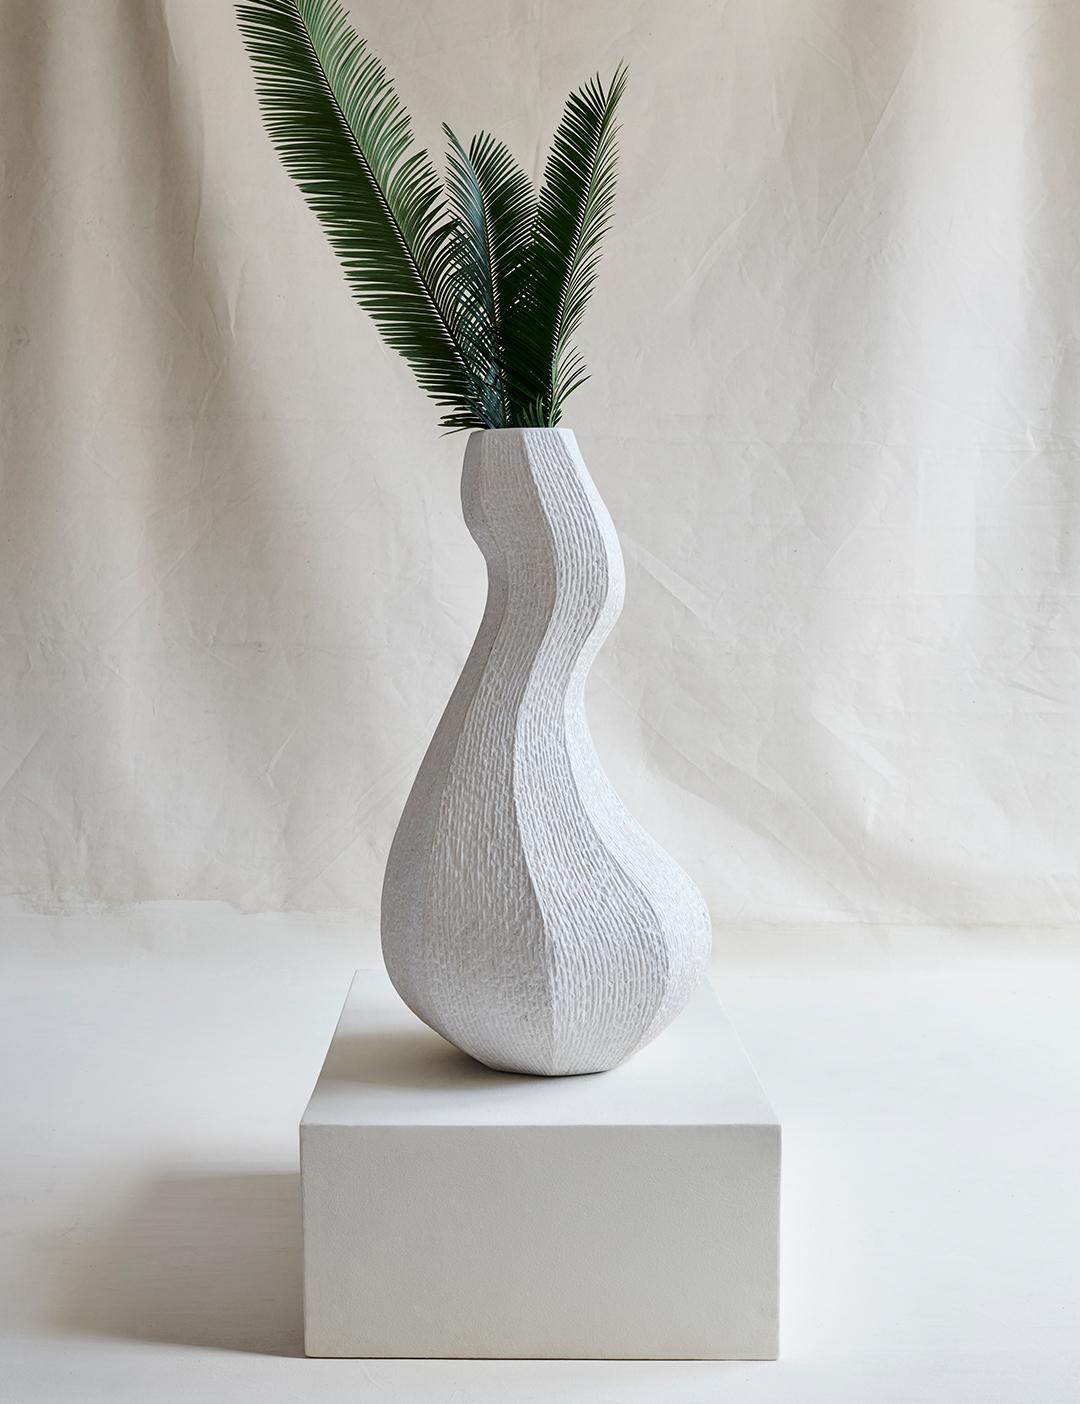 A very large sculptural vessel that brings grandeur to any space it occupies, noted for its organic architecture, striking curves, and natural texture. 

For indoor or outdoor use.

18.7” W x 35.4” H x 18.7” D
47.5 W x 90 H x 47.5 D cm
Material: